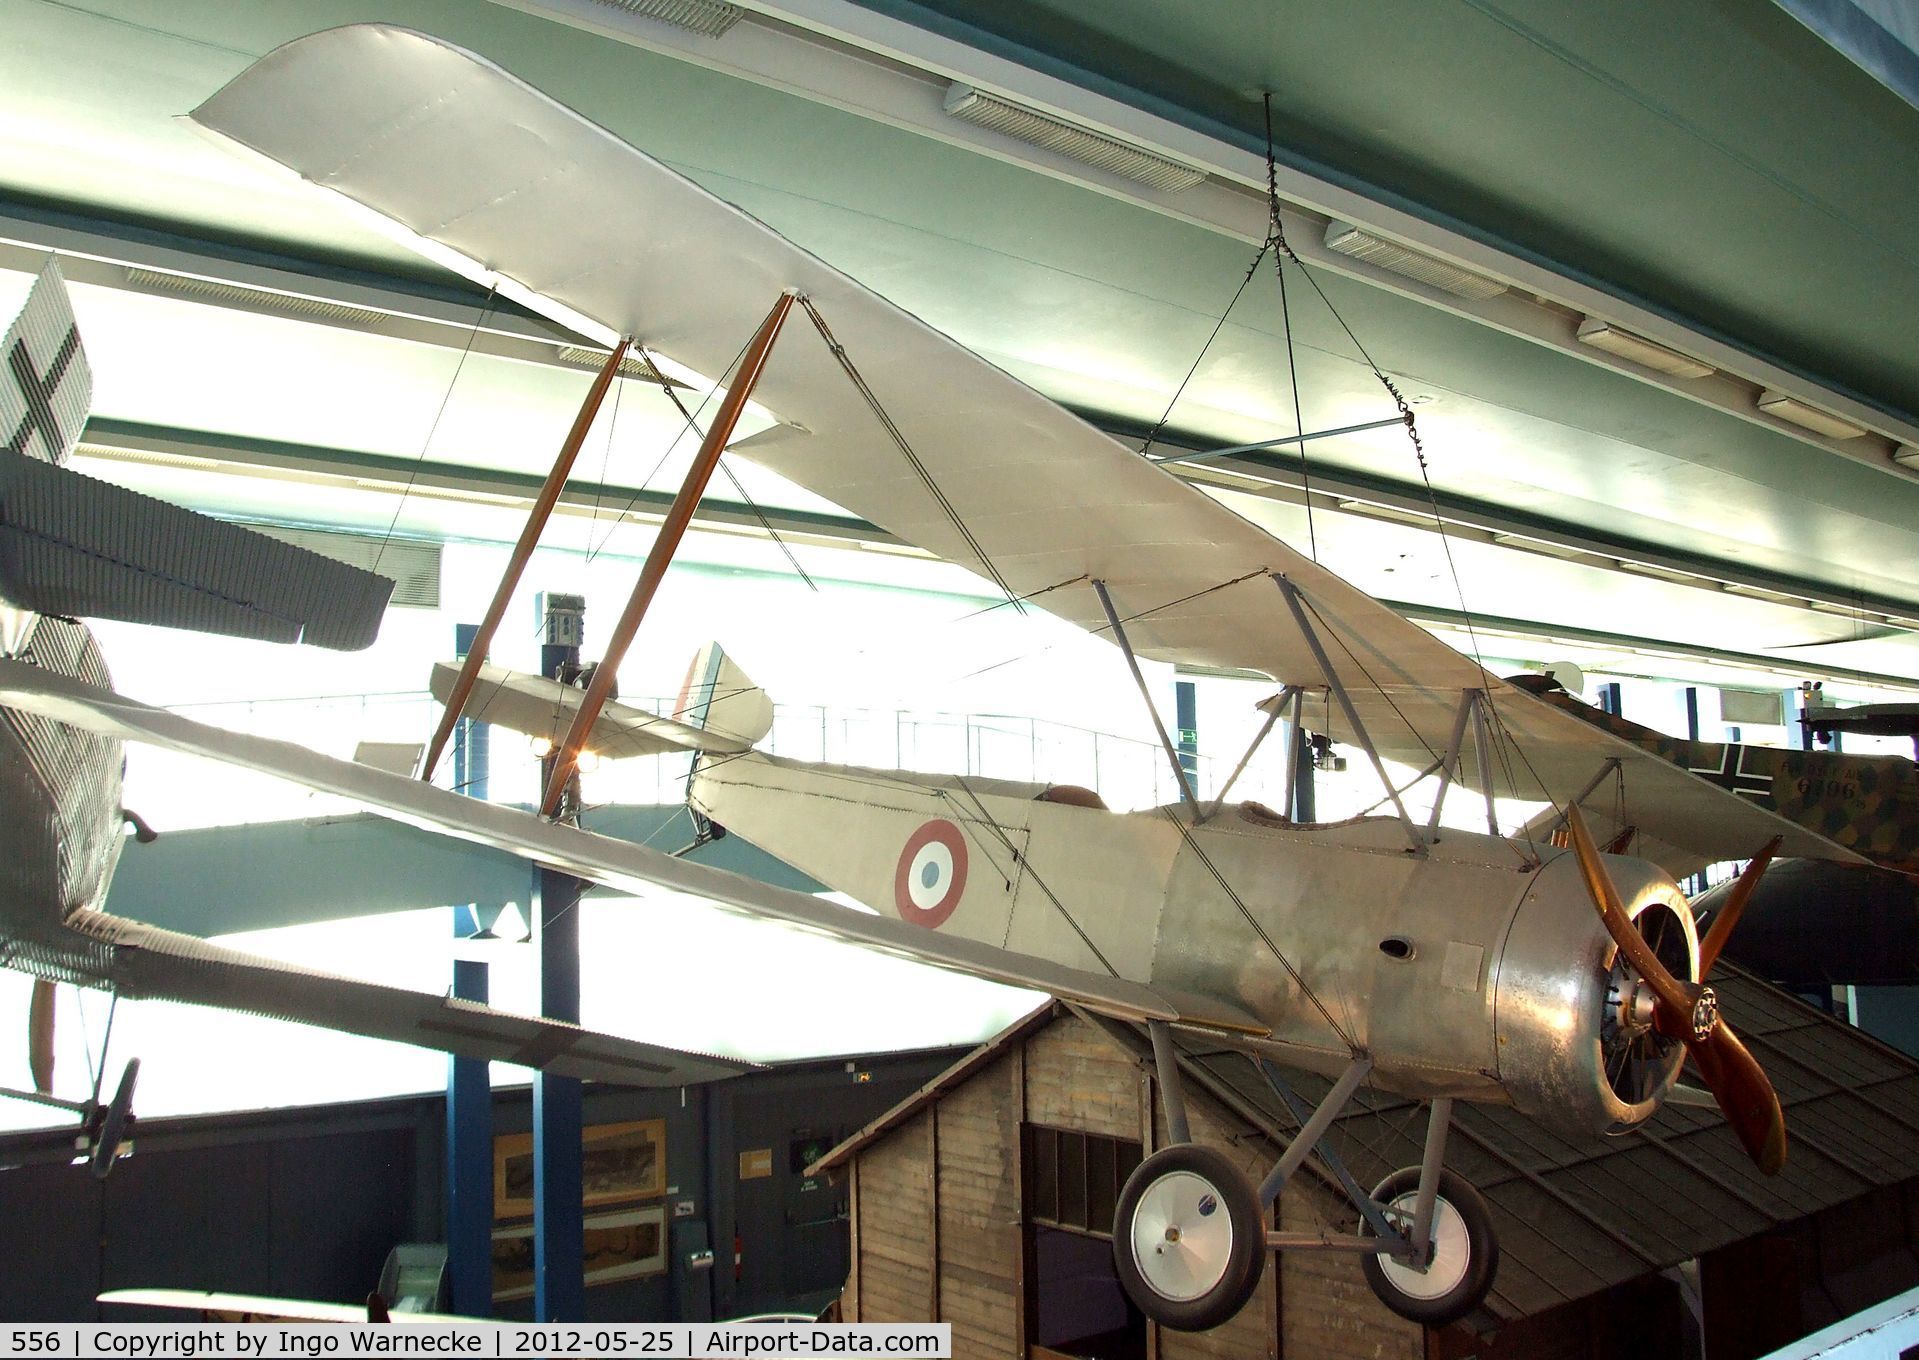 556, Sopwith 1A.2 C/N Not found 556, Sopwith 1A.2  1 1/2-Strutter at the Musee de l'Air, Paris/Le Bourget